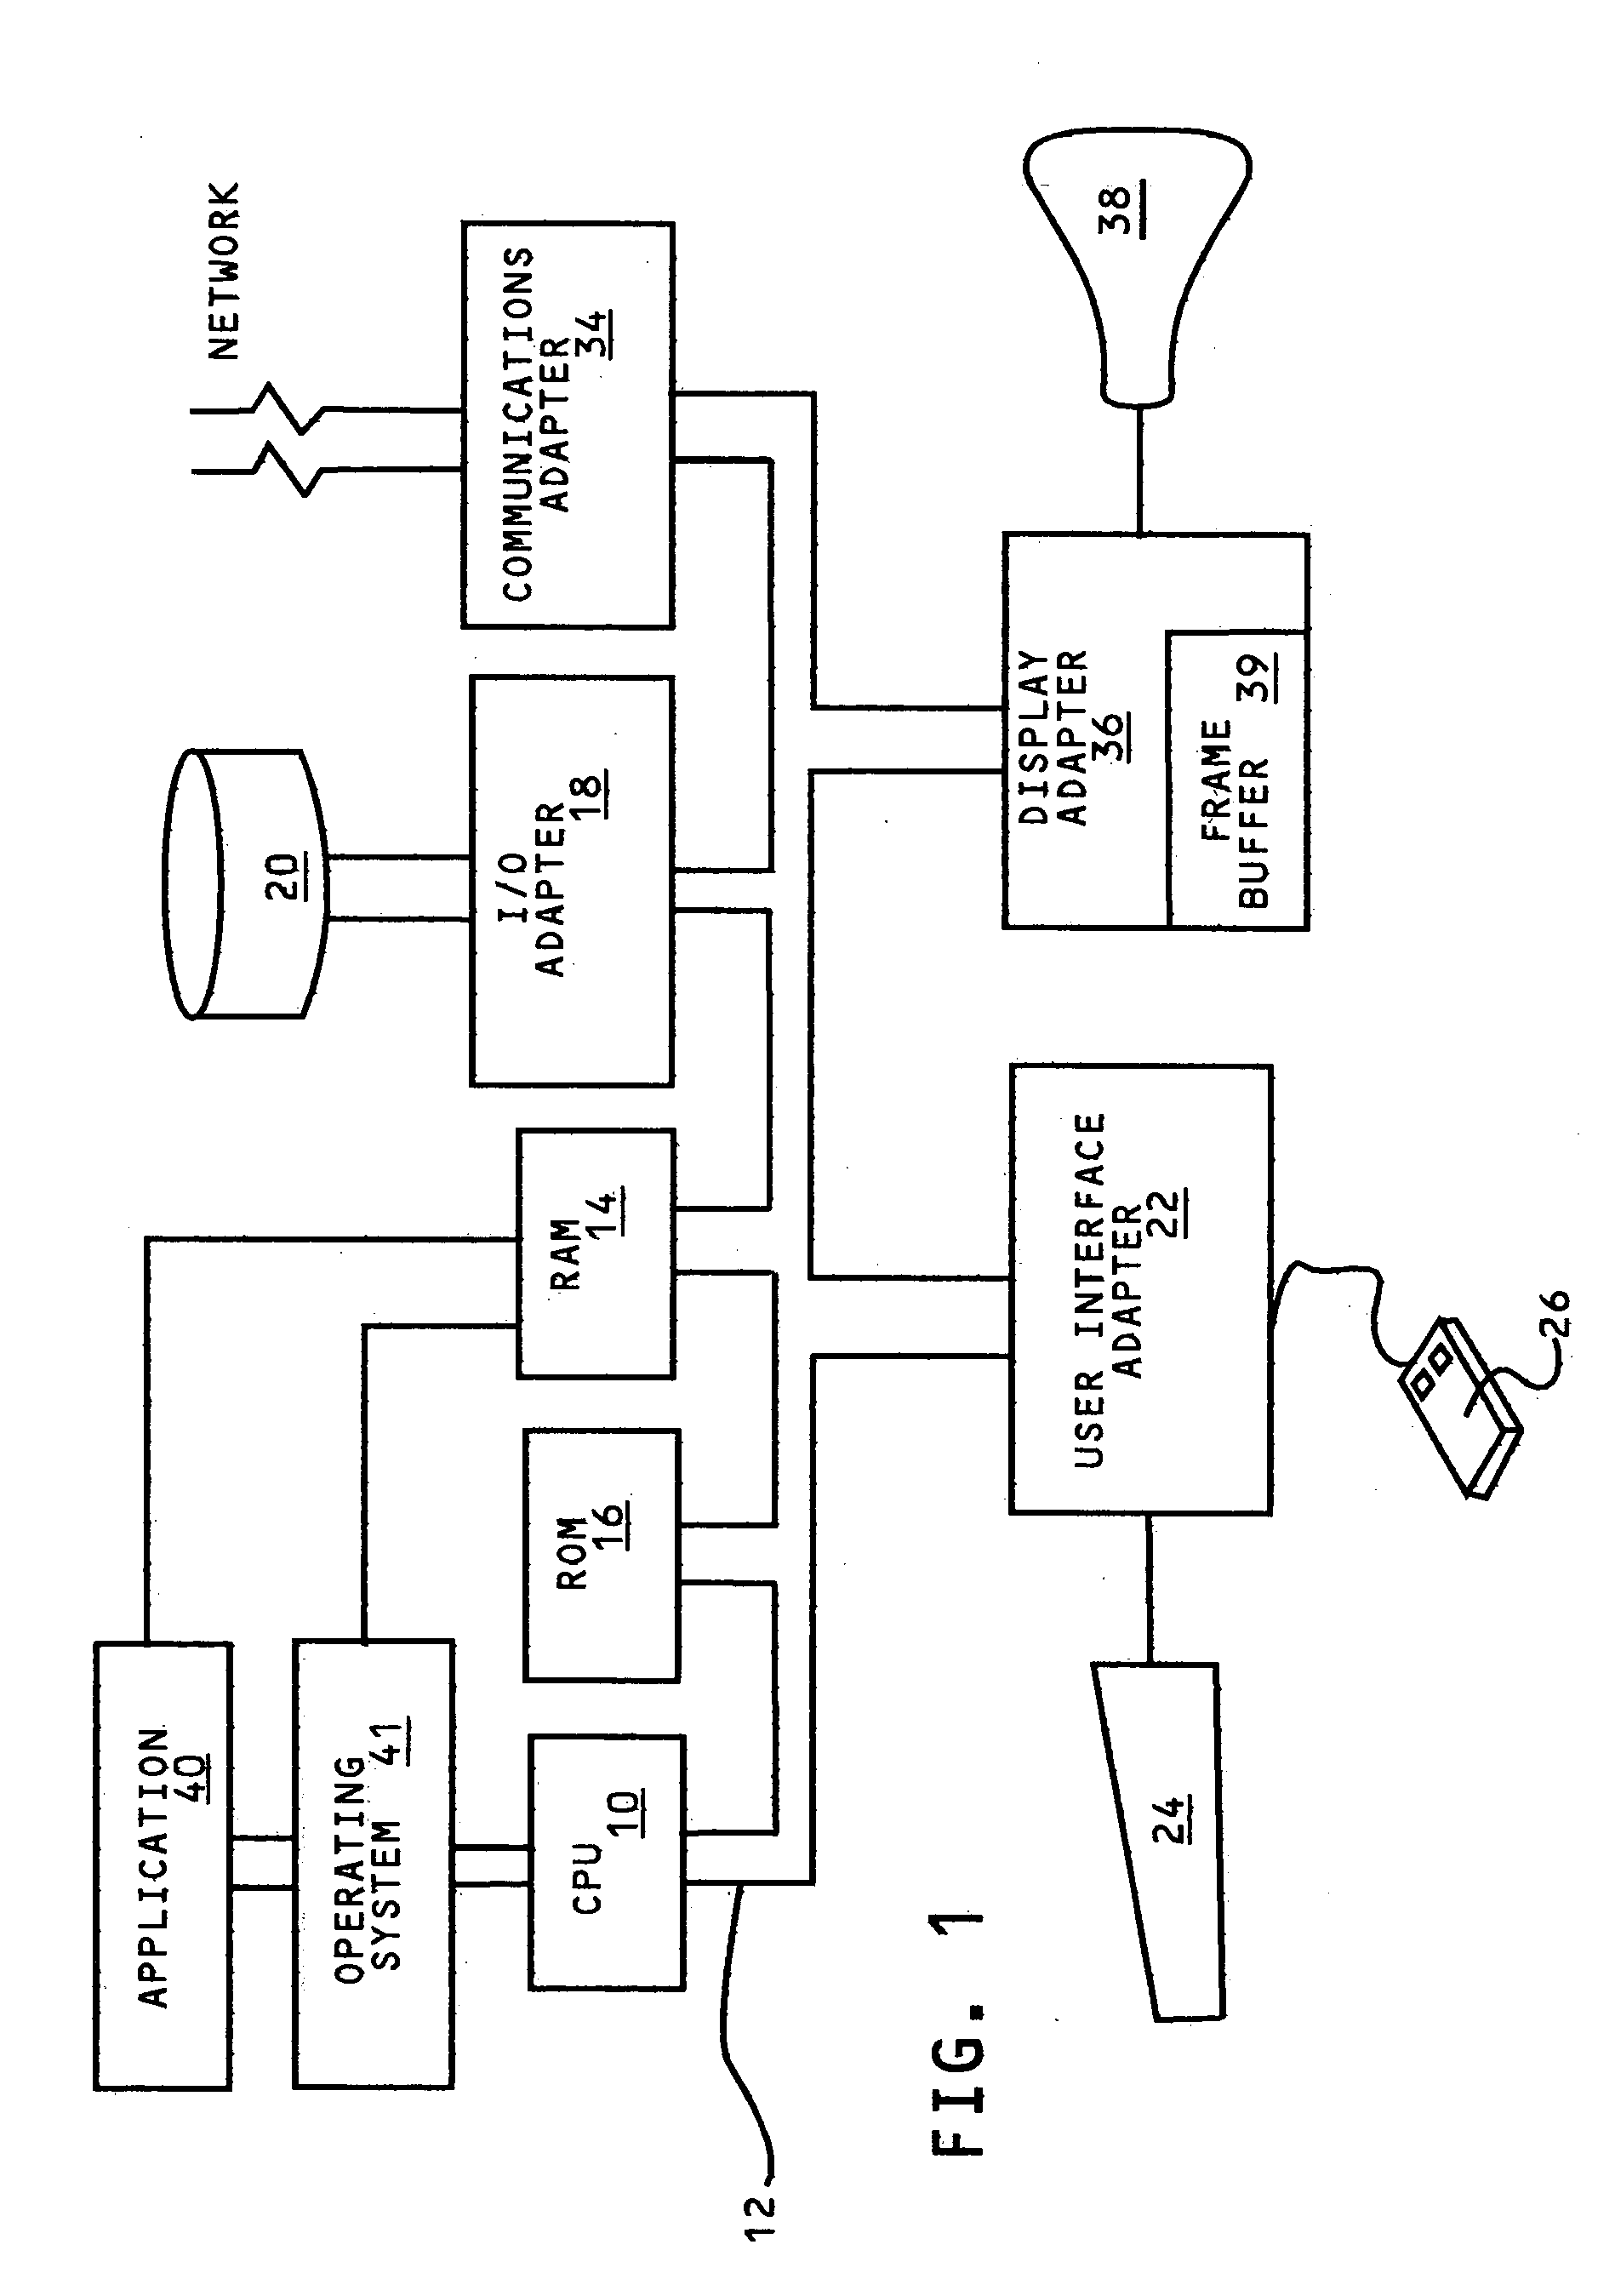 Method and system of printing isolated sections from documents